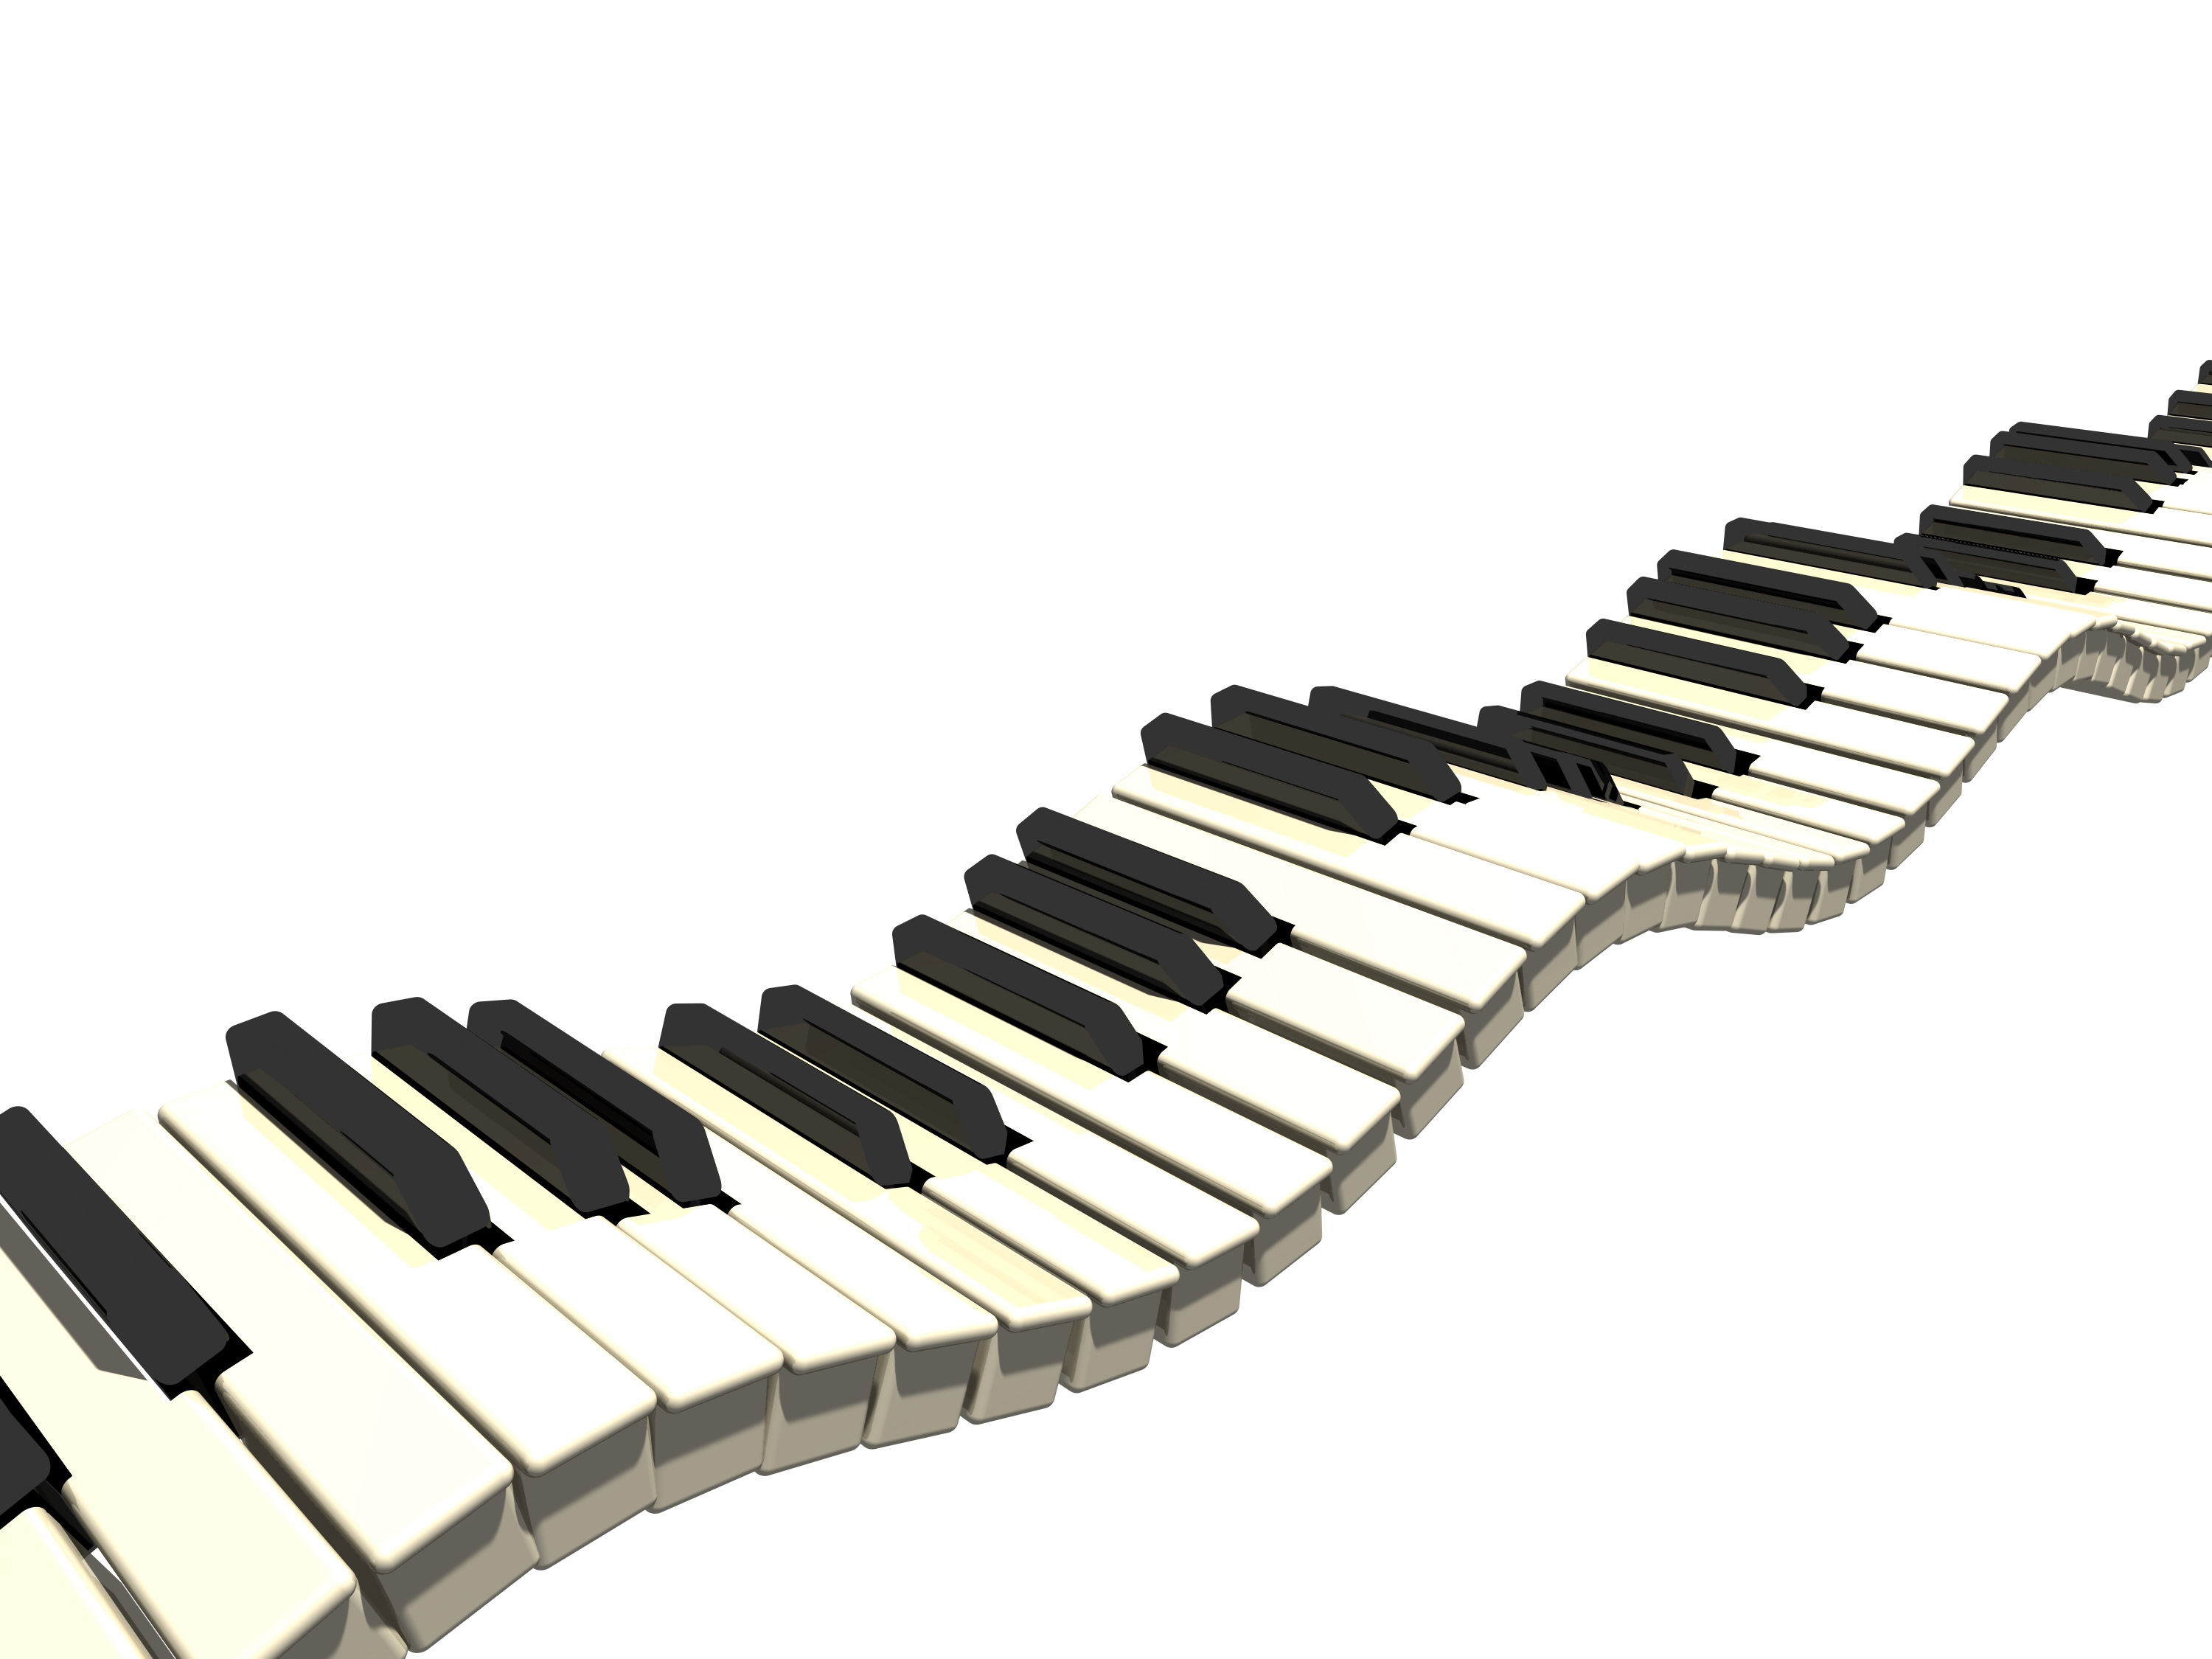 Keyboard and piano clipart 2 image 9